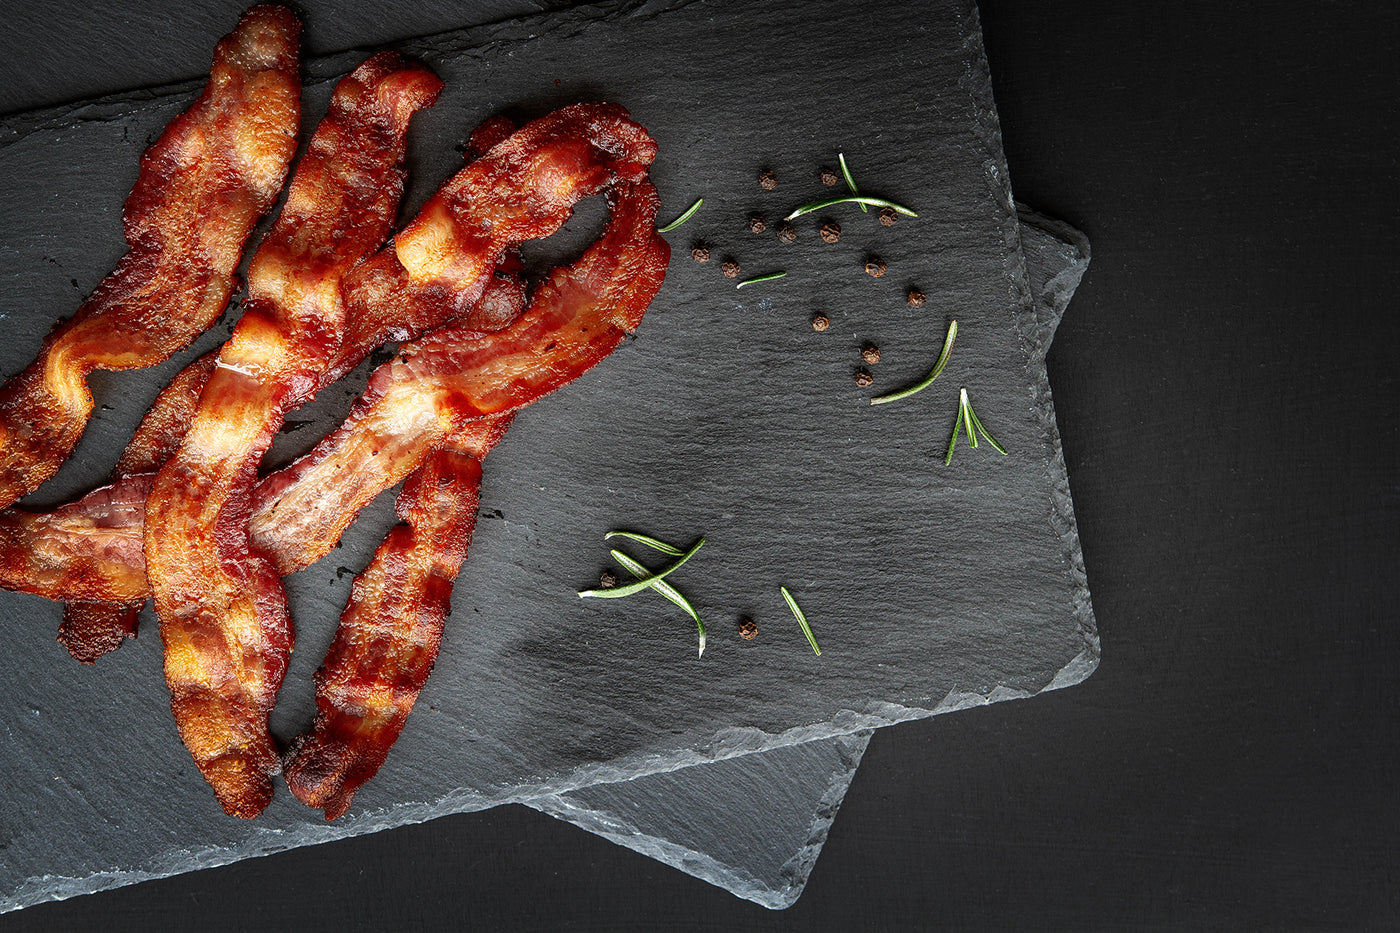 4 slices of cooked bacon sit on a black slate with loose herbs around the edges.